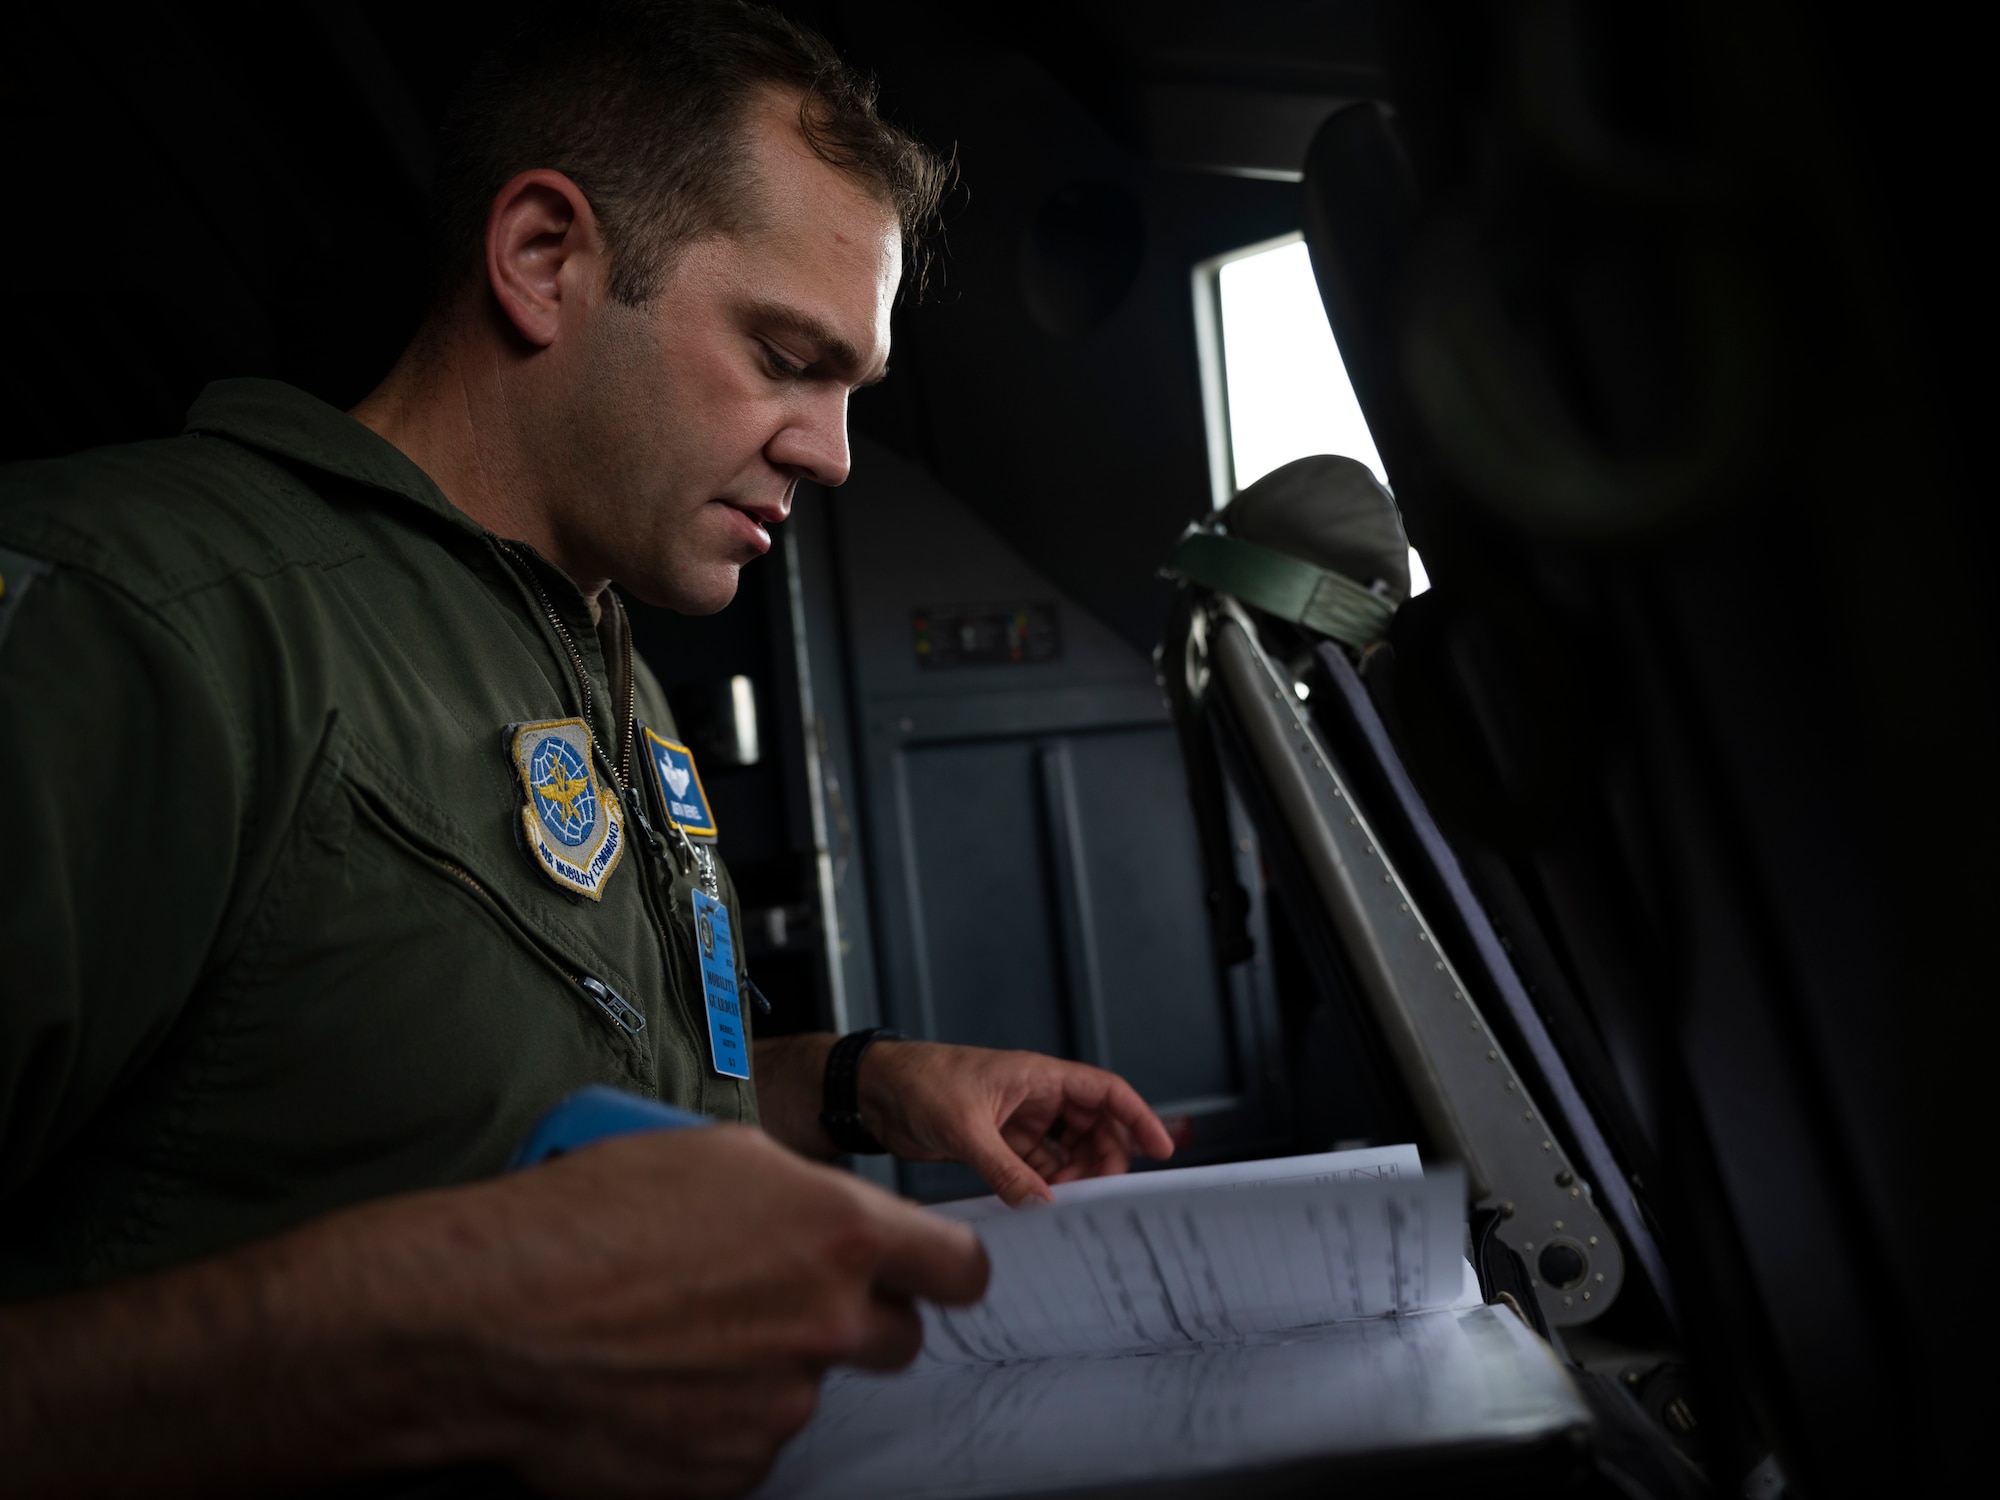 U.S. Air Force Maj. Austin Merkel, a pilot assigned to the 41st Airlift Squadron, reviews flight paperwork on a U.S. Air Force C-130J Super Hercules assigned to the 19th Airlift Wing at Alpena Combat Readiness Training Center, Michigan, May 21, 2021. Mobility Guardian accelerates change for the Air Force and Air Mobility Command by developing the force and advancing warfighting capabilities to enhance our ability to project the Joint Force and ensure strategic deterrence. (U.S. Air Force photo by Staff Sgt. Joseph Pick)